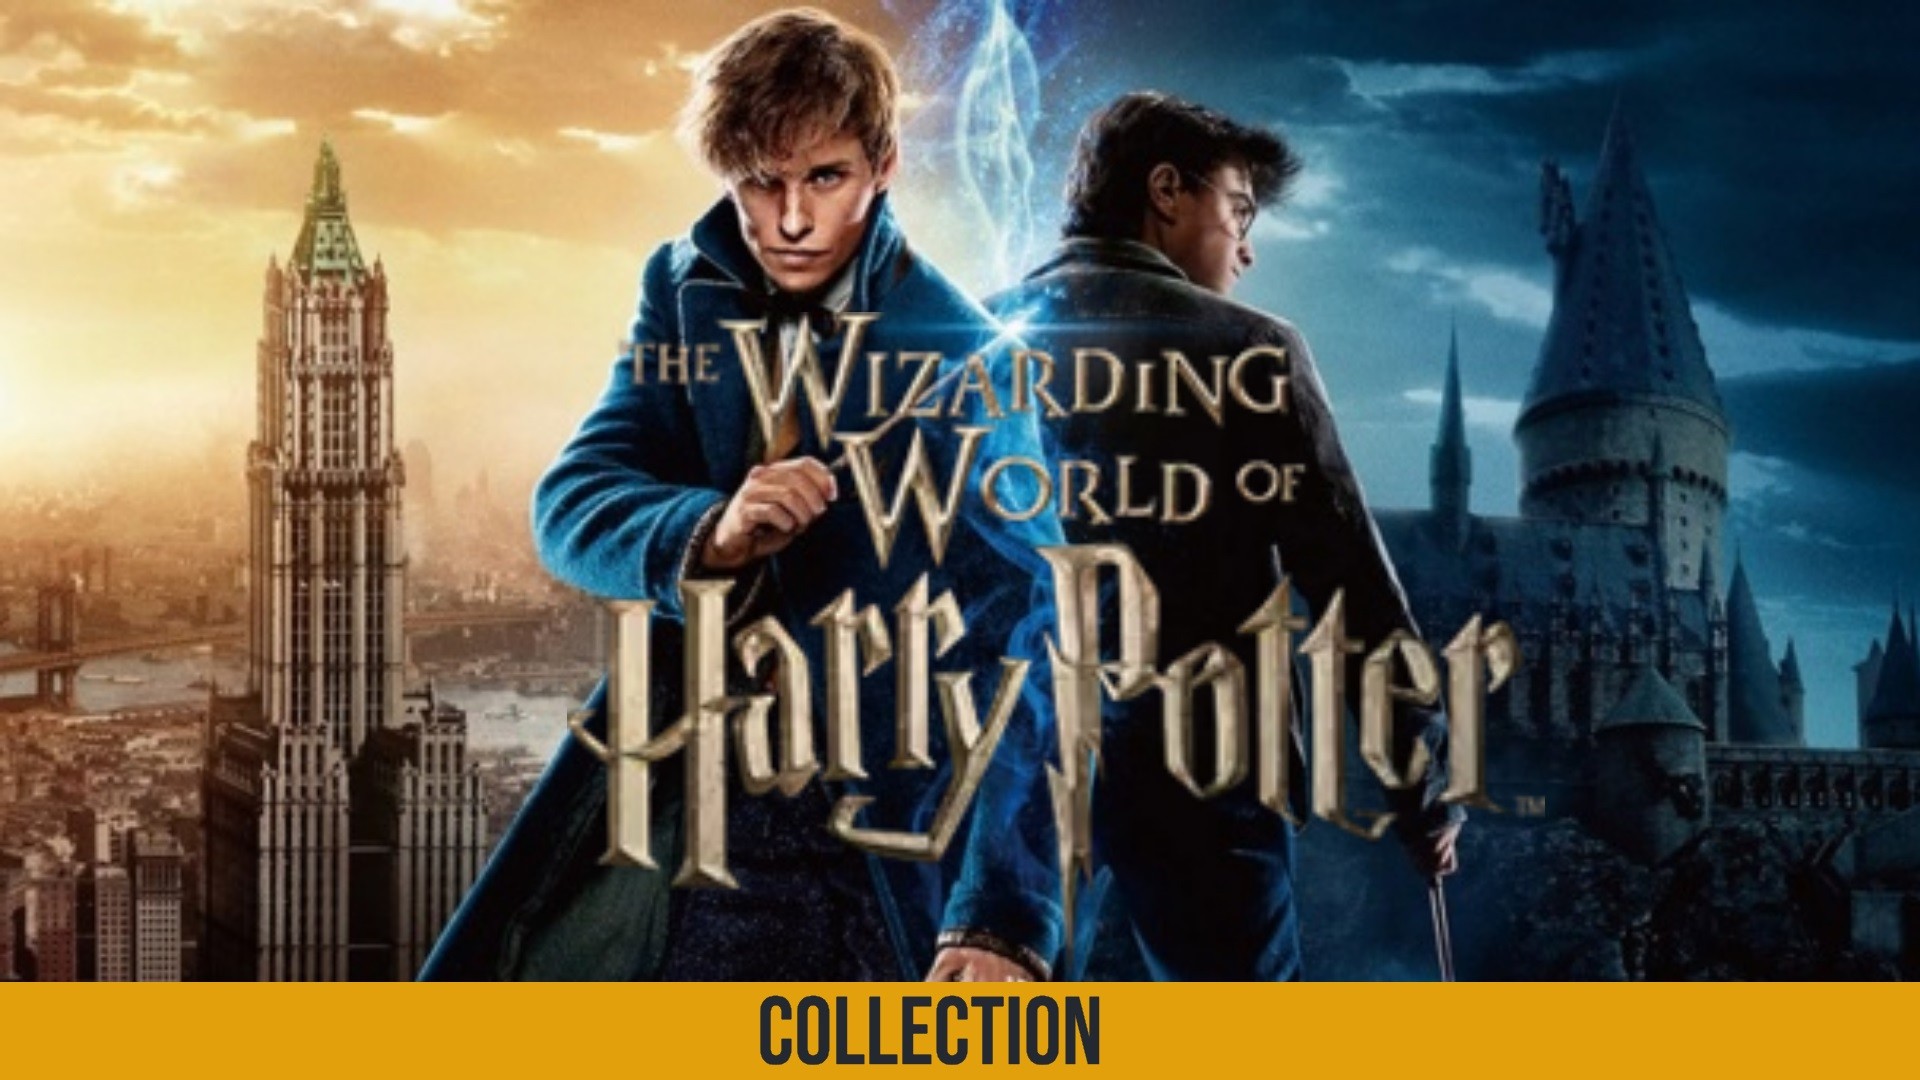 The Wizarding World Of Harry Potter Background Plex Collection Posters